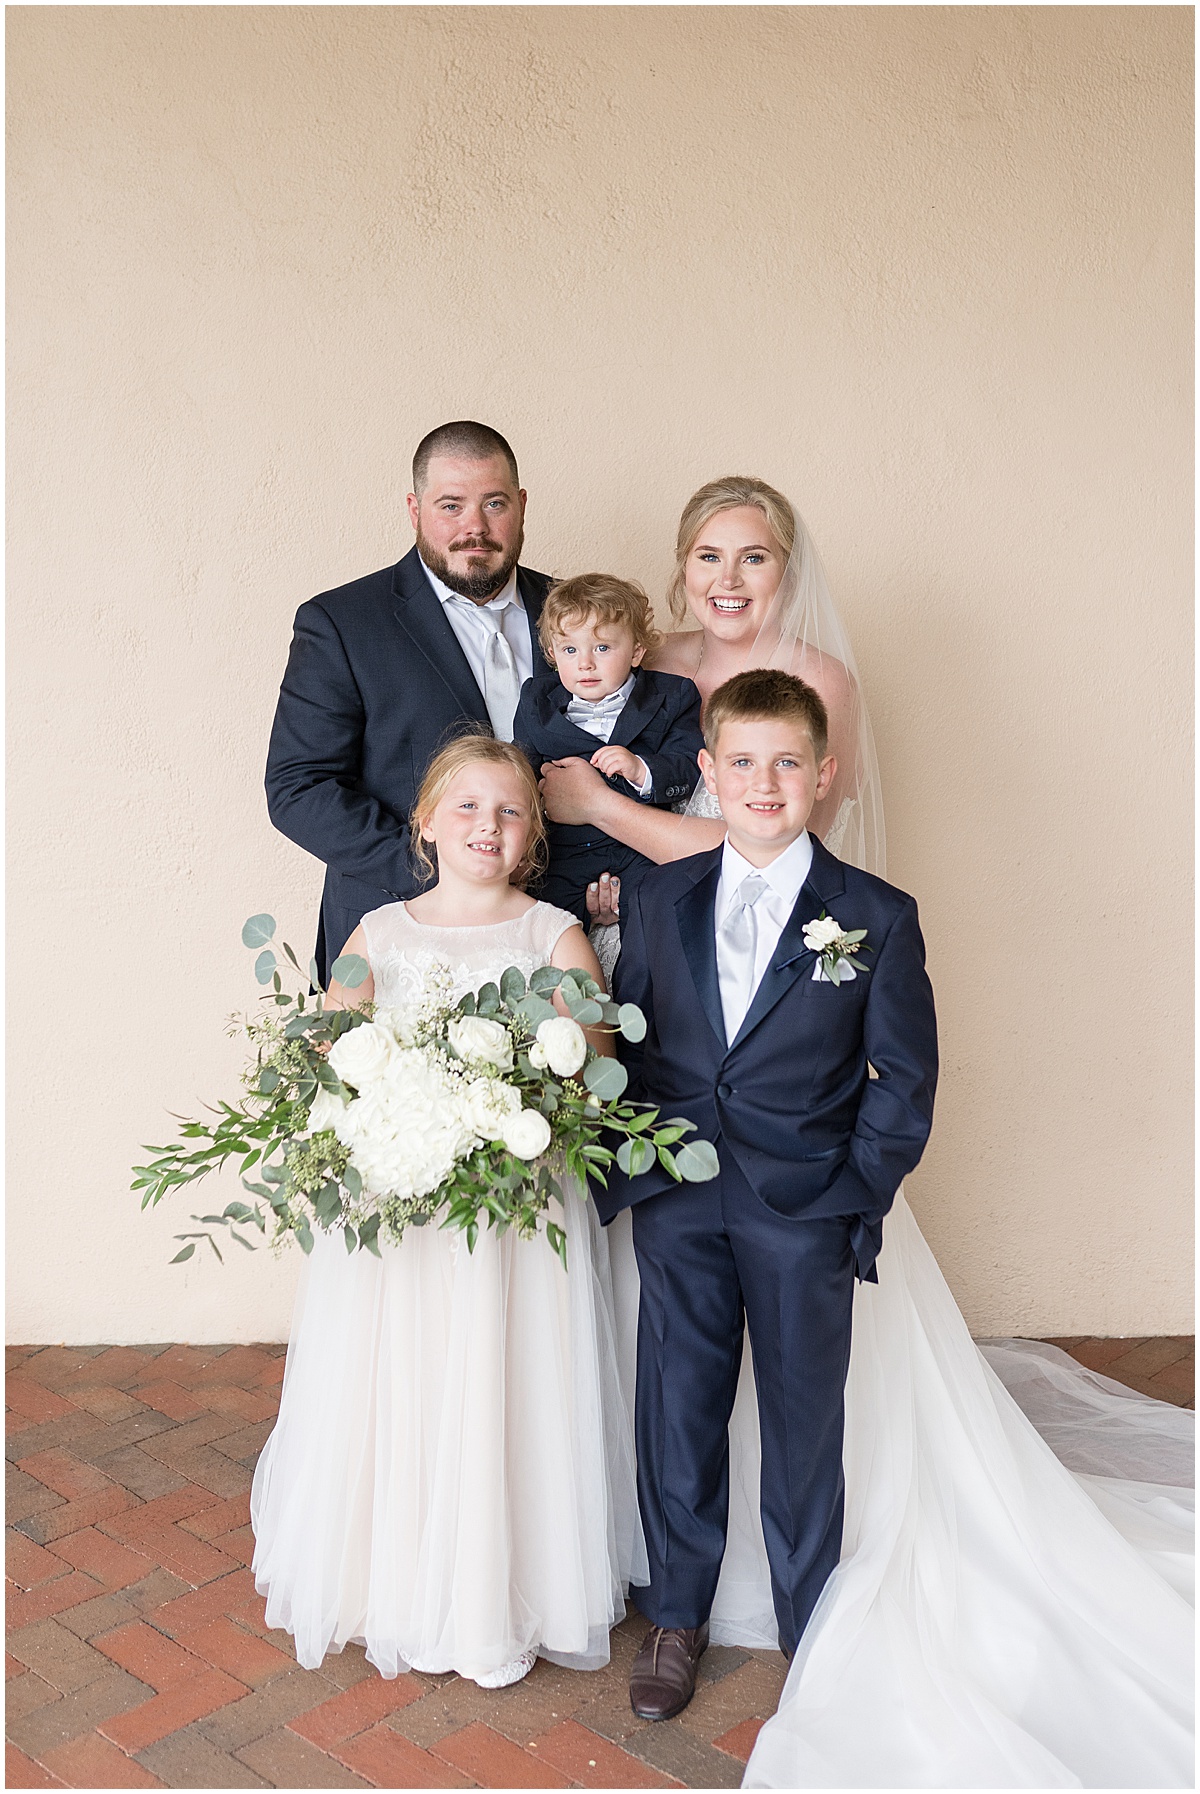 Family photos at Fowler House Mansion wedding in Lafayette, Indiana by Victoria Rayburn Photography